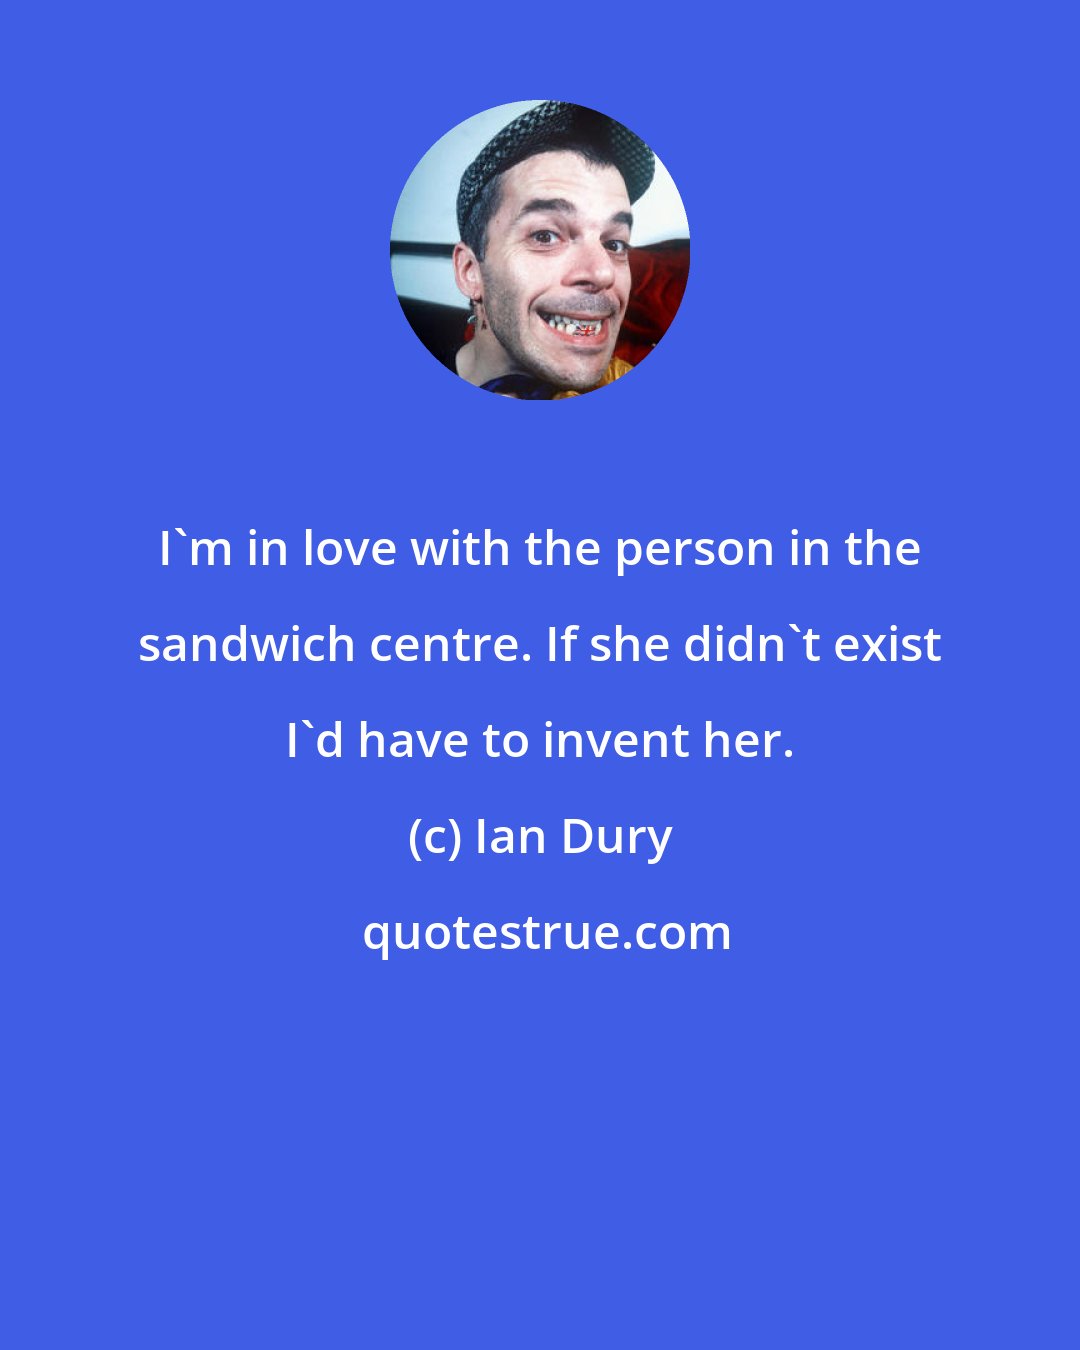 Ian Dury: I'm in love with the person in the sandwich centre. If she didn't exist I'd have to invent her.